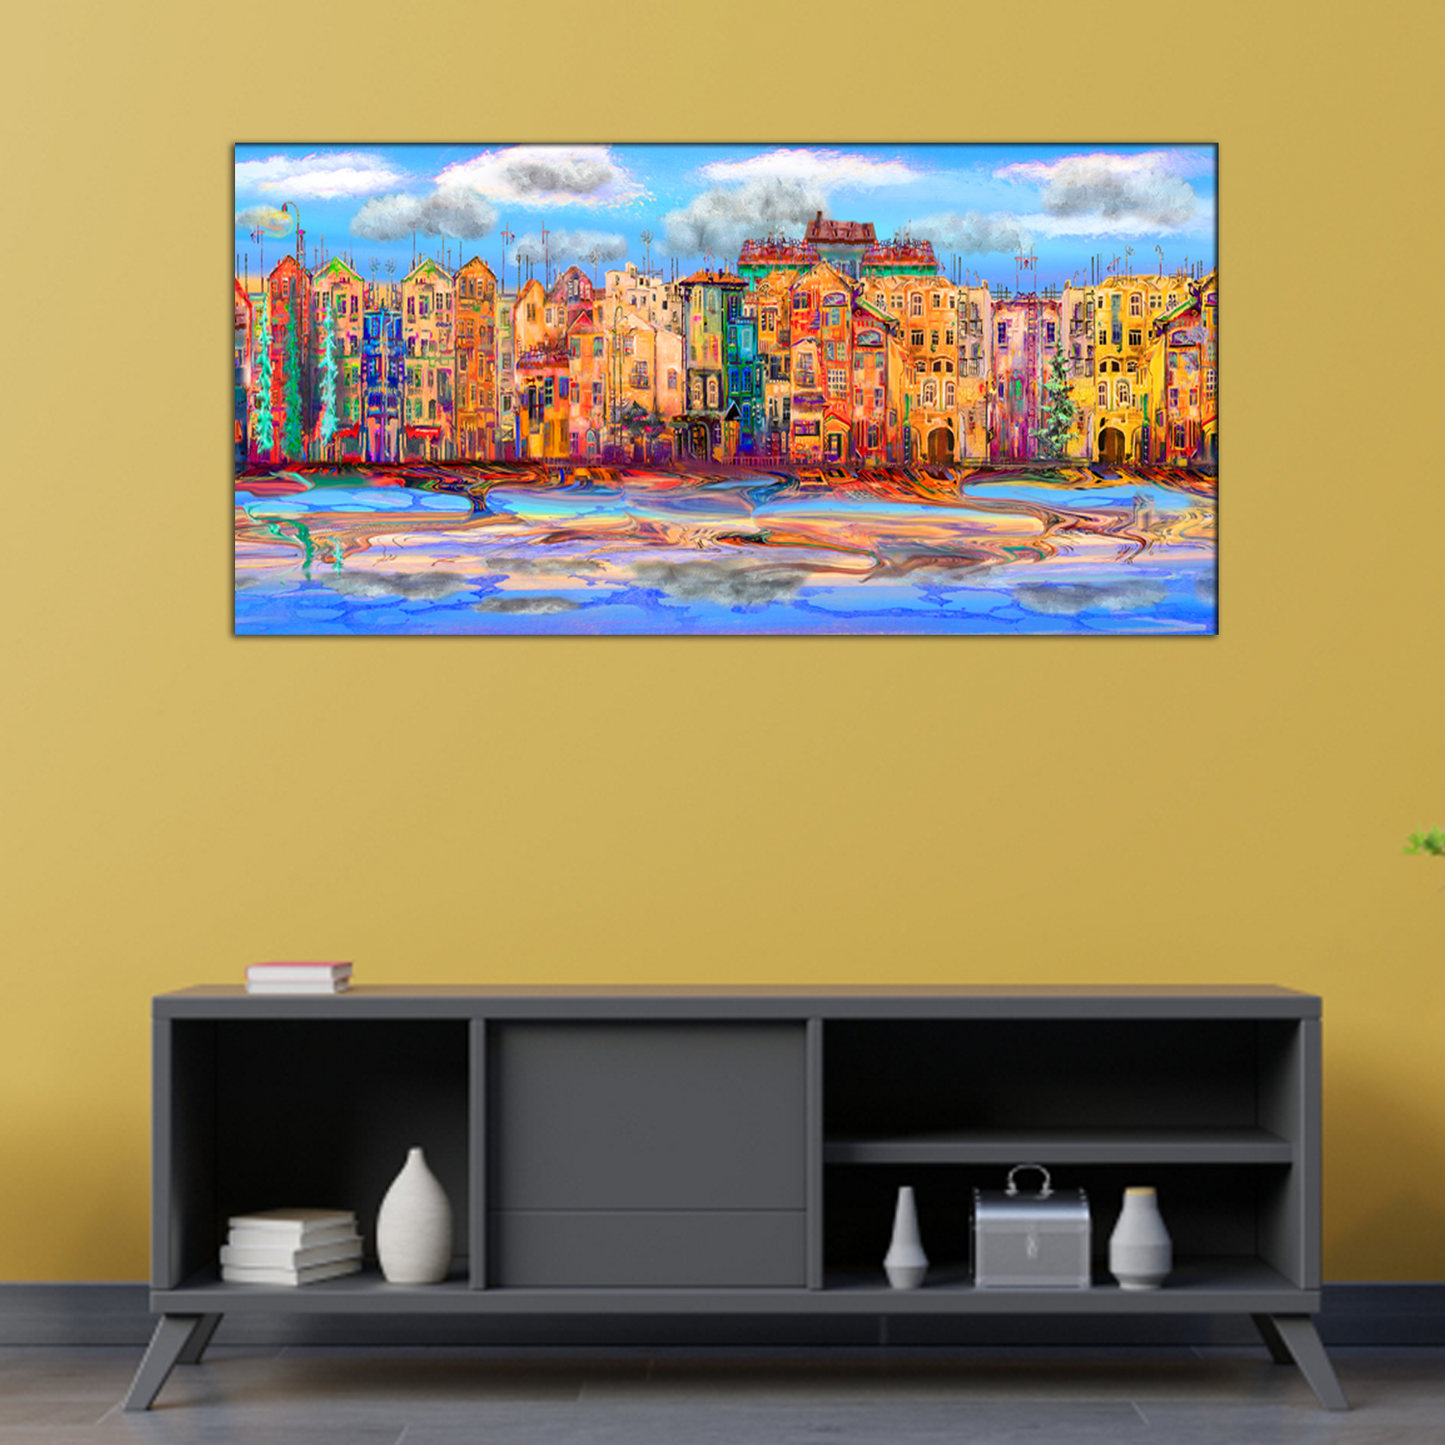 Town Near of the Sea Canvas Print Wall Painting